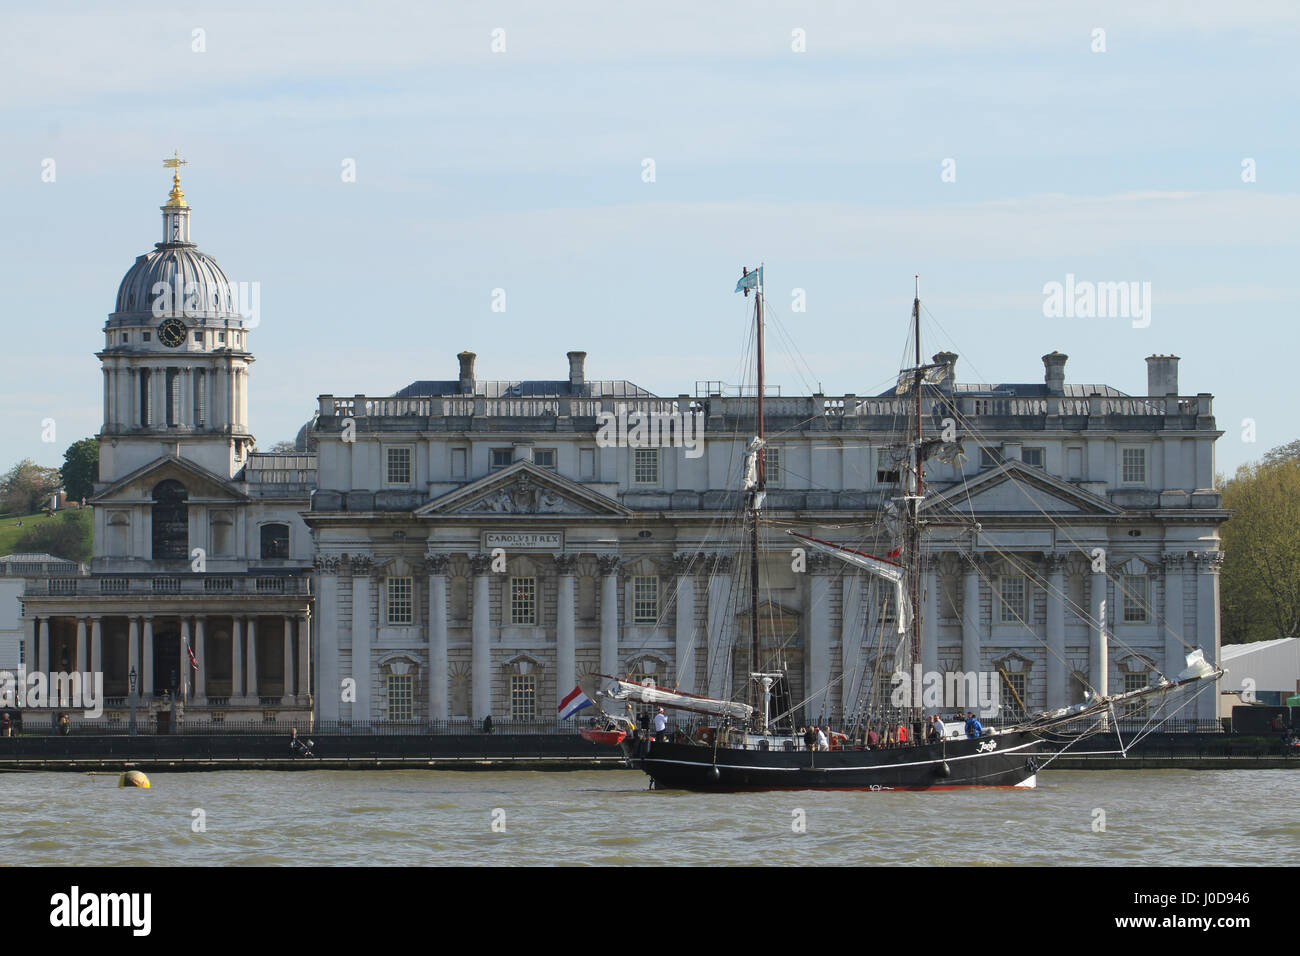 London, UK. 12th Apr, 2017. London, United Kingdom - April 12: The Jantye sails past the Maritime Greenwich UNESCO World Heritage Site ahead of the 2017 Tall Ships Regatta. Around 40 Tall Ships are scheduled to sail the river Thames to Greenwich, marking the 150th anniversary of the Canadian Confederation.The ships are due to sail to Quebec, Canada, via Portugal, Bermuda and Boston. Credit: David Mbiyu/Alamy Live News Stock Photo